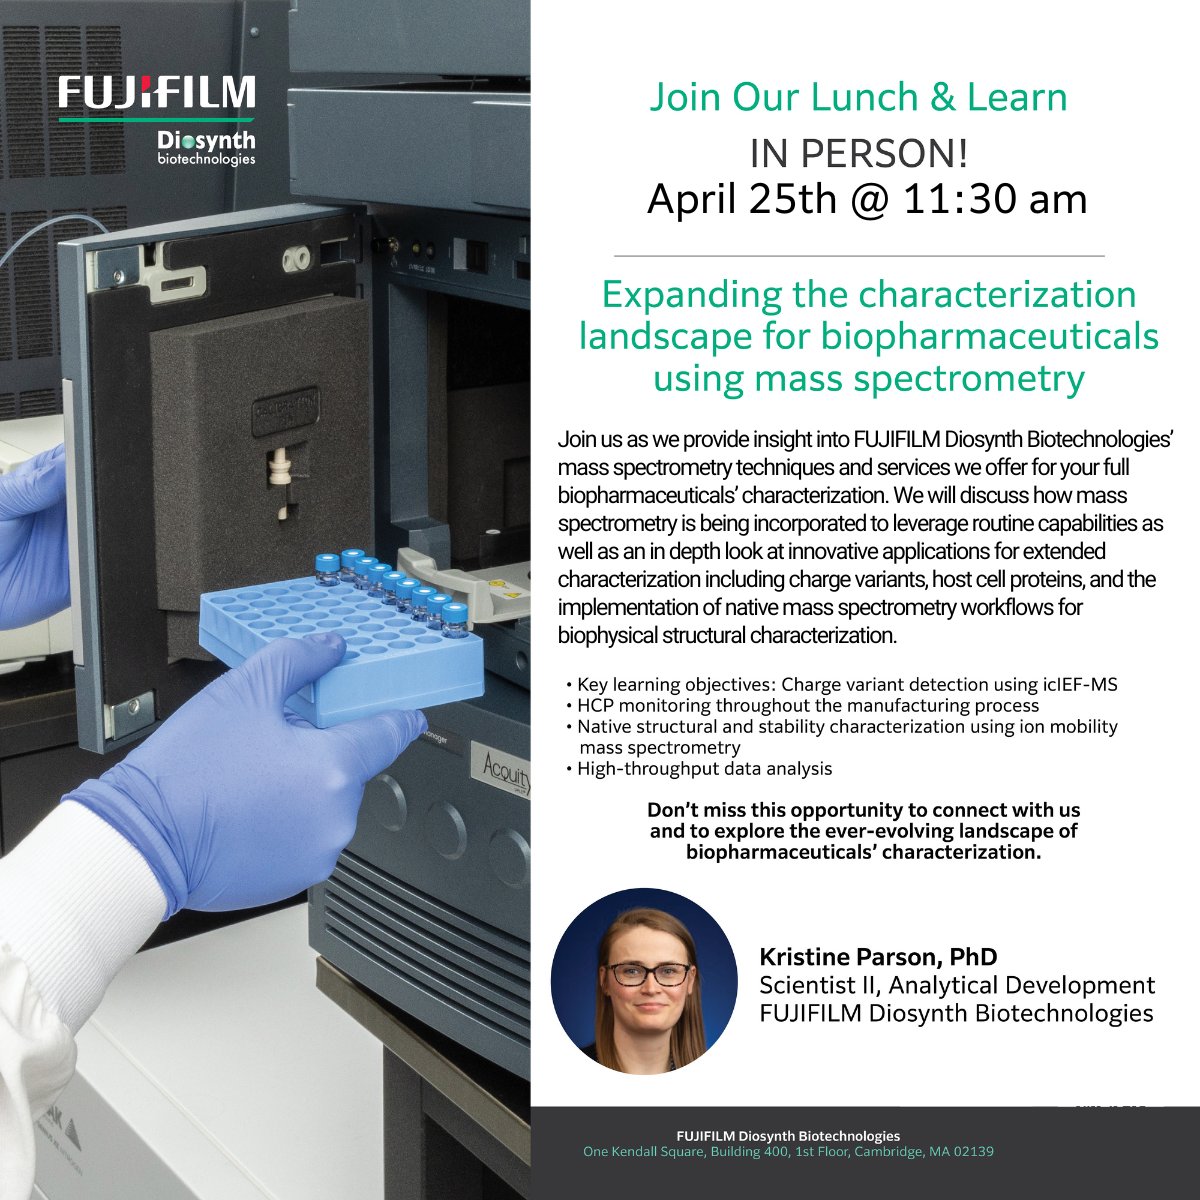 🔬 Join us IN PERSON on April 25th, 2024, at 11:30 am EST for a LUNCH & LEARN session in Cambridge, MA! app.tickettailor.com/events/fujifil…

#MassSpectrometry #Biopharmaceuticals #Characterization #Innovation #Science #Biotechnology